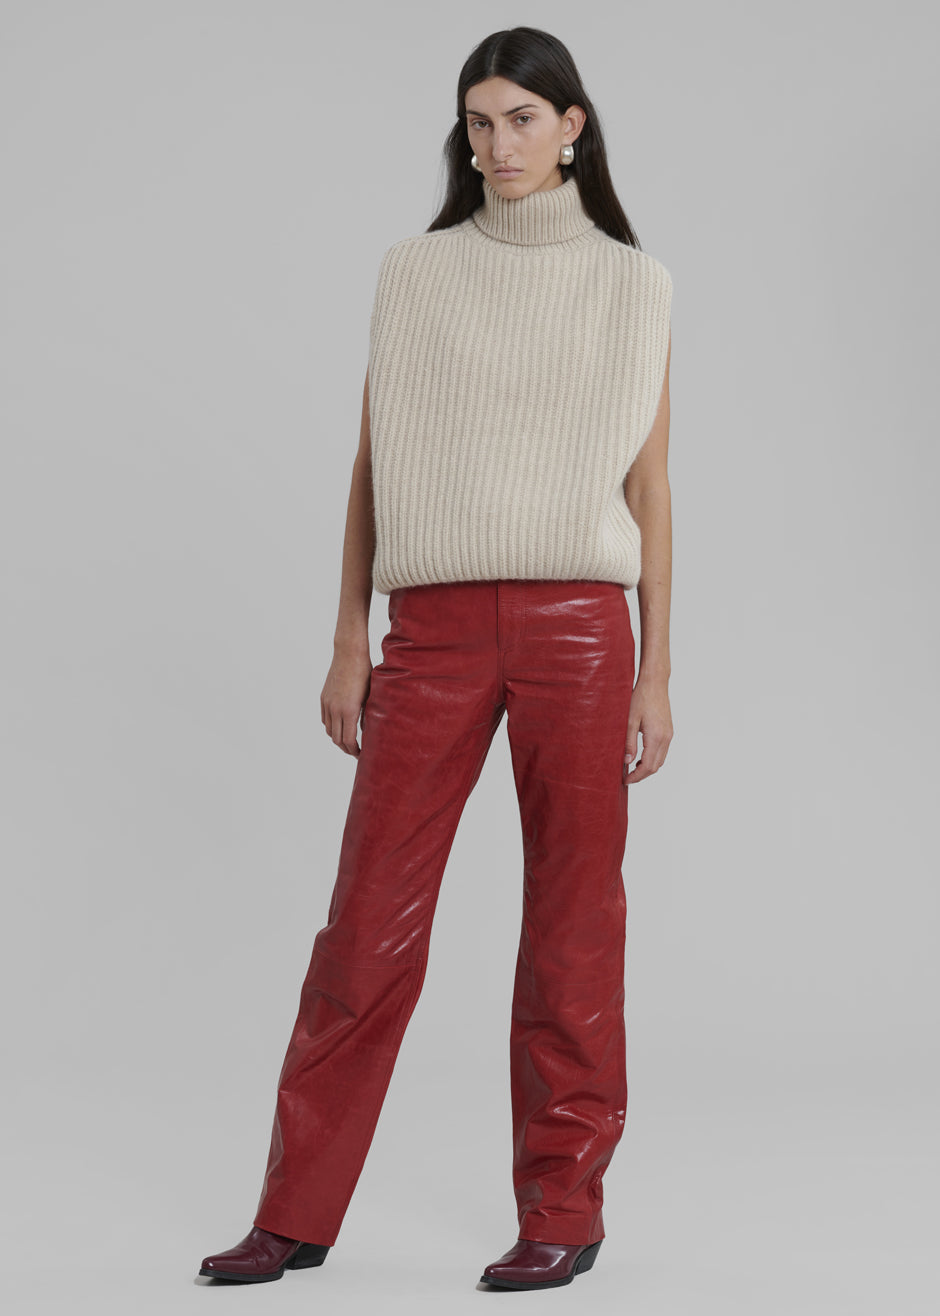 REMAIN Pants Crunchy Leather - Chili Pepper - 9